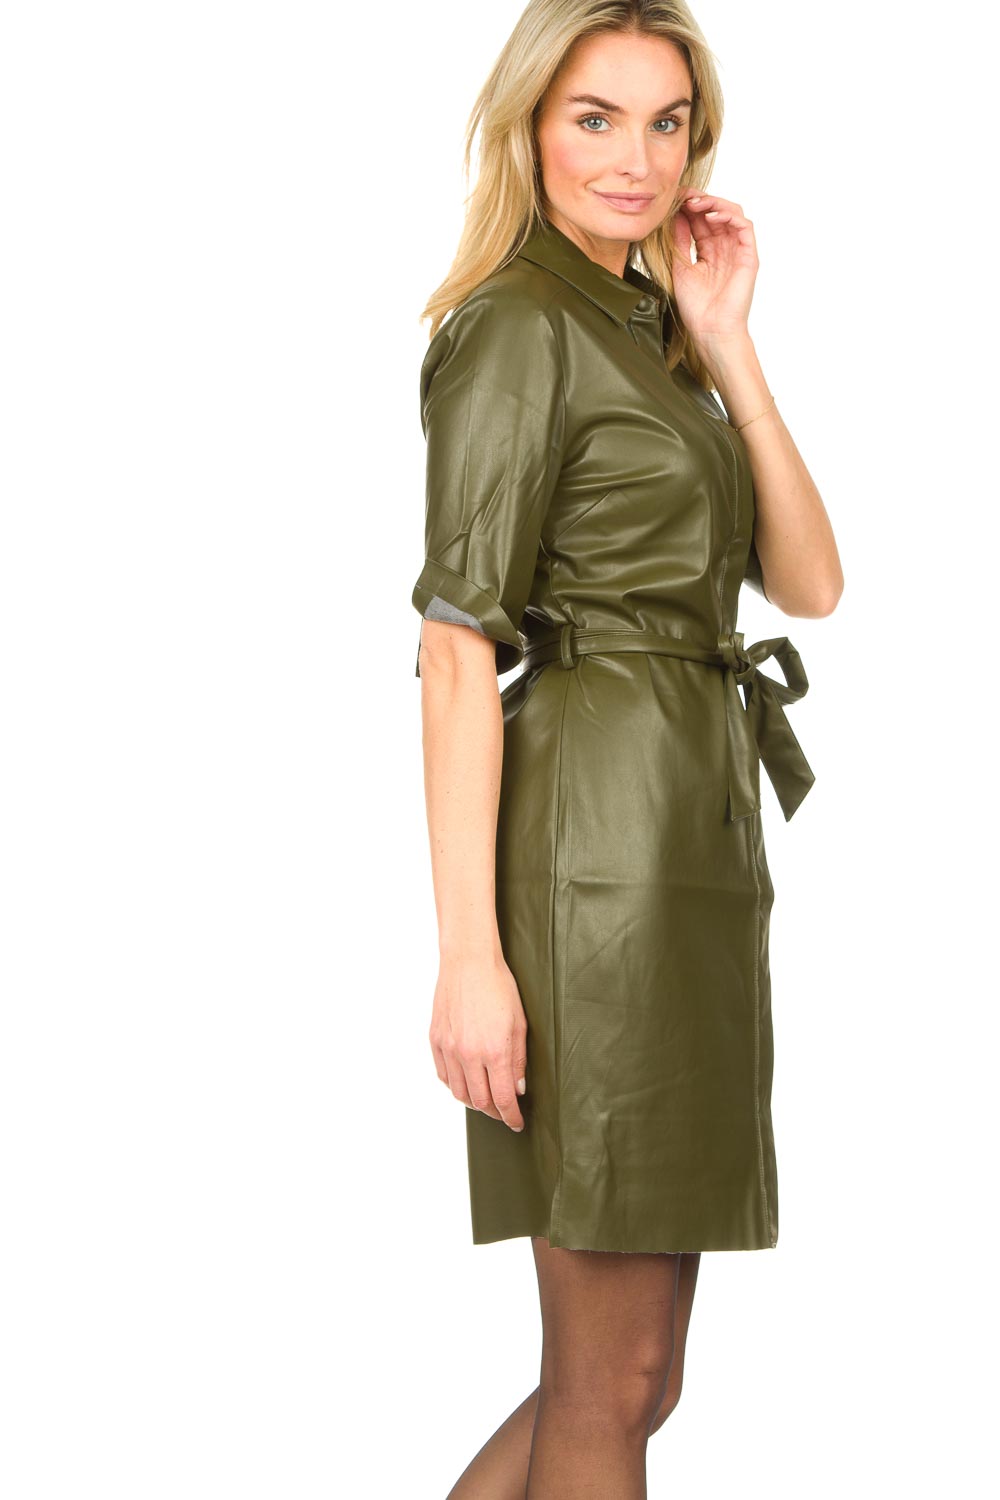 Faux leather dress Baroon | olive green ...